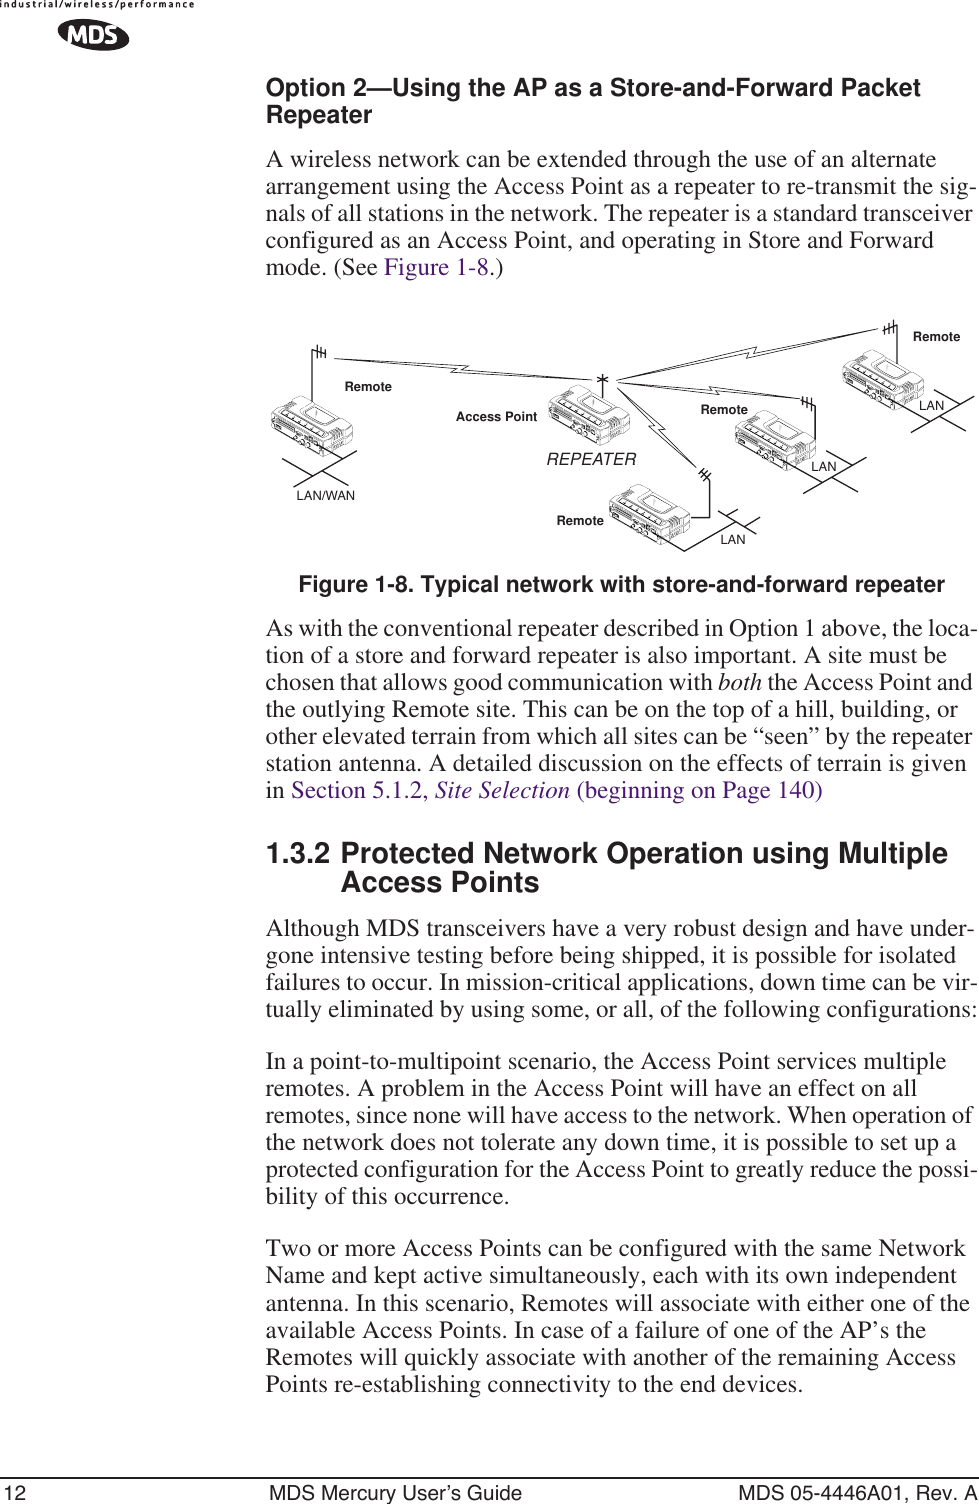 12 MDS Mercury User’s Guide MDS 05-4446A01, Rev. AOption 2—Using the AP as a Store-and-Forward Packet RepeaterA wireless network can be extended through the use of an alternate arrangement using the Access Point as a repeater to re-transmit the sig-nals of all stations in the network. The repeater is a standard transceiver configured as an Access Point, and operating in Store and Forward mode. (See Figure 1-8.)Invisible place holderFigure 1-8. Typical network with store-and-forward repeaterAs with the conventional repeater described in Option 1 above, the loca-tion of a store and forward repeater is also important. A site must be chosen that allows good communication with both the Access Point and the outlying Remote site. This can be on the top of a hill, building, or other elevated terrain from which all sites can be “seen” by the repeater station antenna. A detailed discussion on the effects of terrain is given in Section 5.1.2, Site Selection (beginning on Page 140)1.3.2 Protected Network Operation using Multiple Access PointsAlthough MDS transceivers have a very robust design and have under-gone intensive testing before being shipped, it is possible for isolated failures to occur. In mission-critical applications, down time can be vir-tually eliminated by using some, or all, of the following configurations:In a point-to-multipoint scenario, the Access Point services multiple remotes. A problem in the Access Point will have an effect on all remotes, since none will have access to the network. When operation of the network does not tolerate any down time, it is possible to set up a protected configuration for the Access Point to greatly reduce the possi-bility of this occurrence.Two or more Access Points can be configured with the same Network Name and kept active simultaneously, each with its own independent antenna. In this scenario, Remotes will associate with either one of the available Access Points. In case of a failure of one of the AP’s the Remotes will quickly associate with another of the remaining Access Points re-establishing connectivity to the end devices.RemoteRemoteRemoteRemoteAccess PointLAN/WANREPEATERLANLANLAN